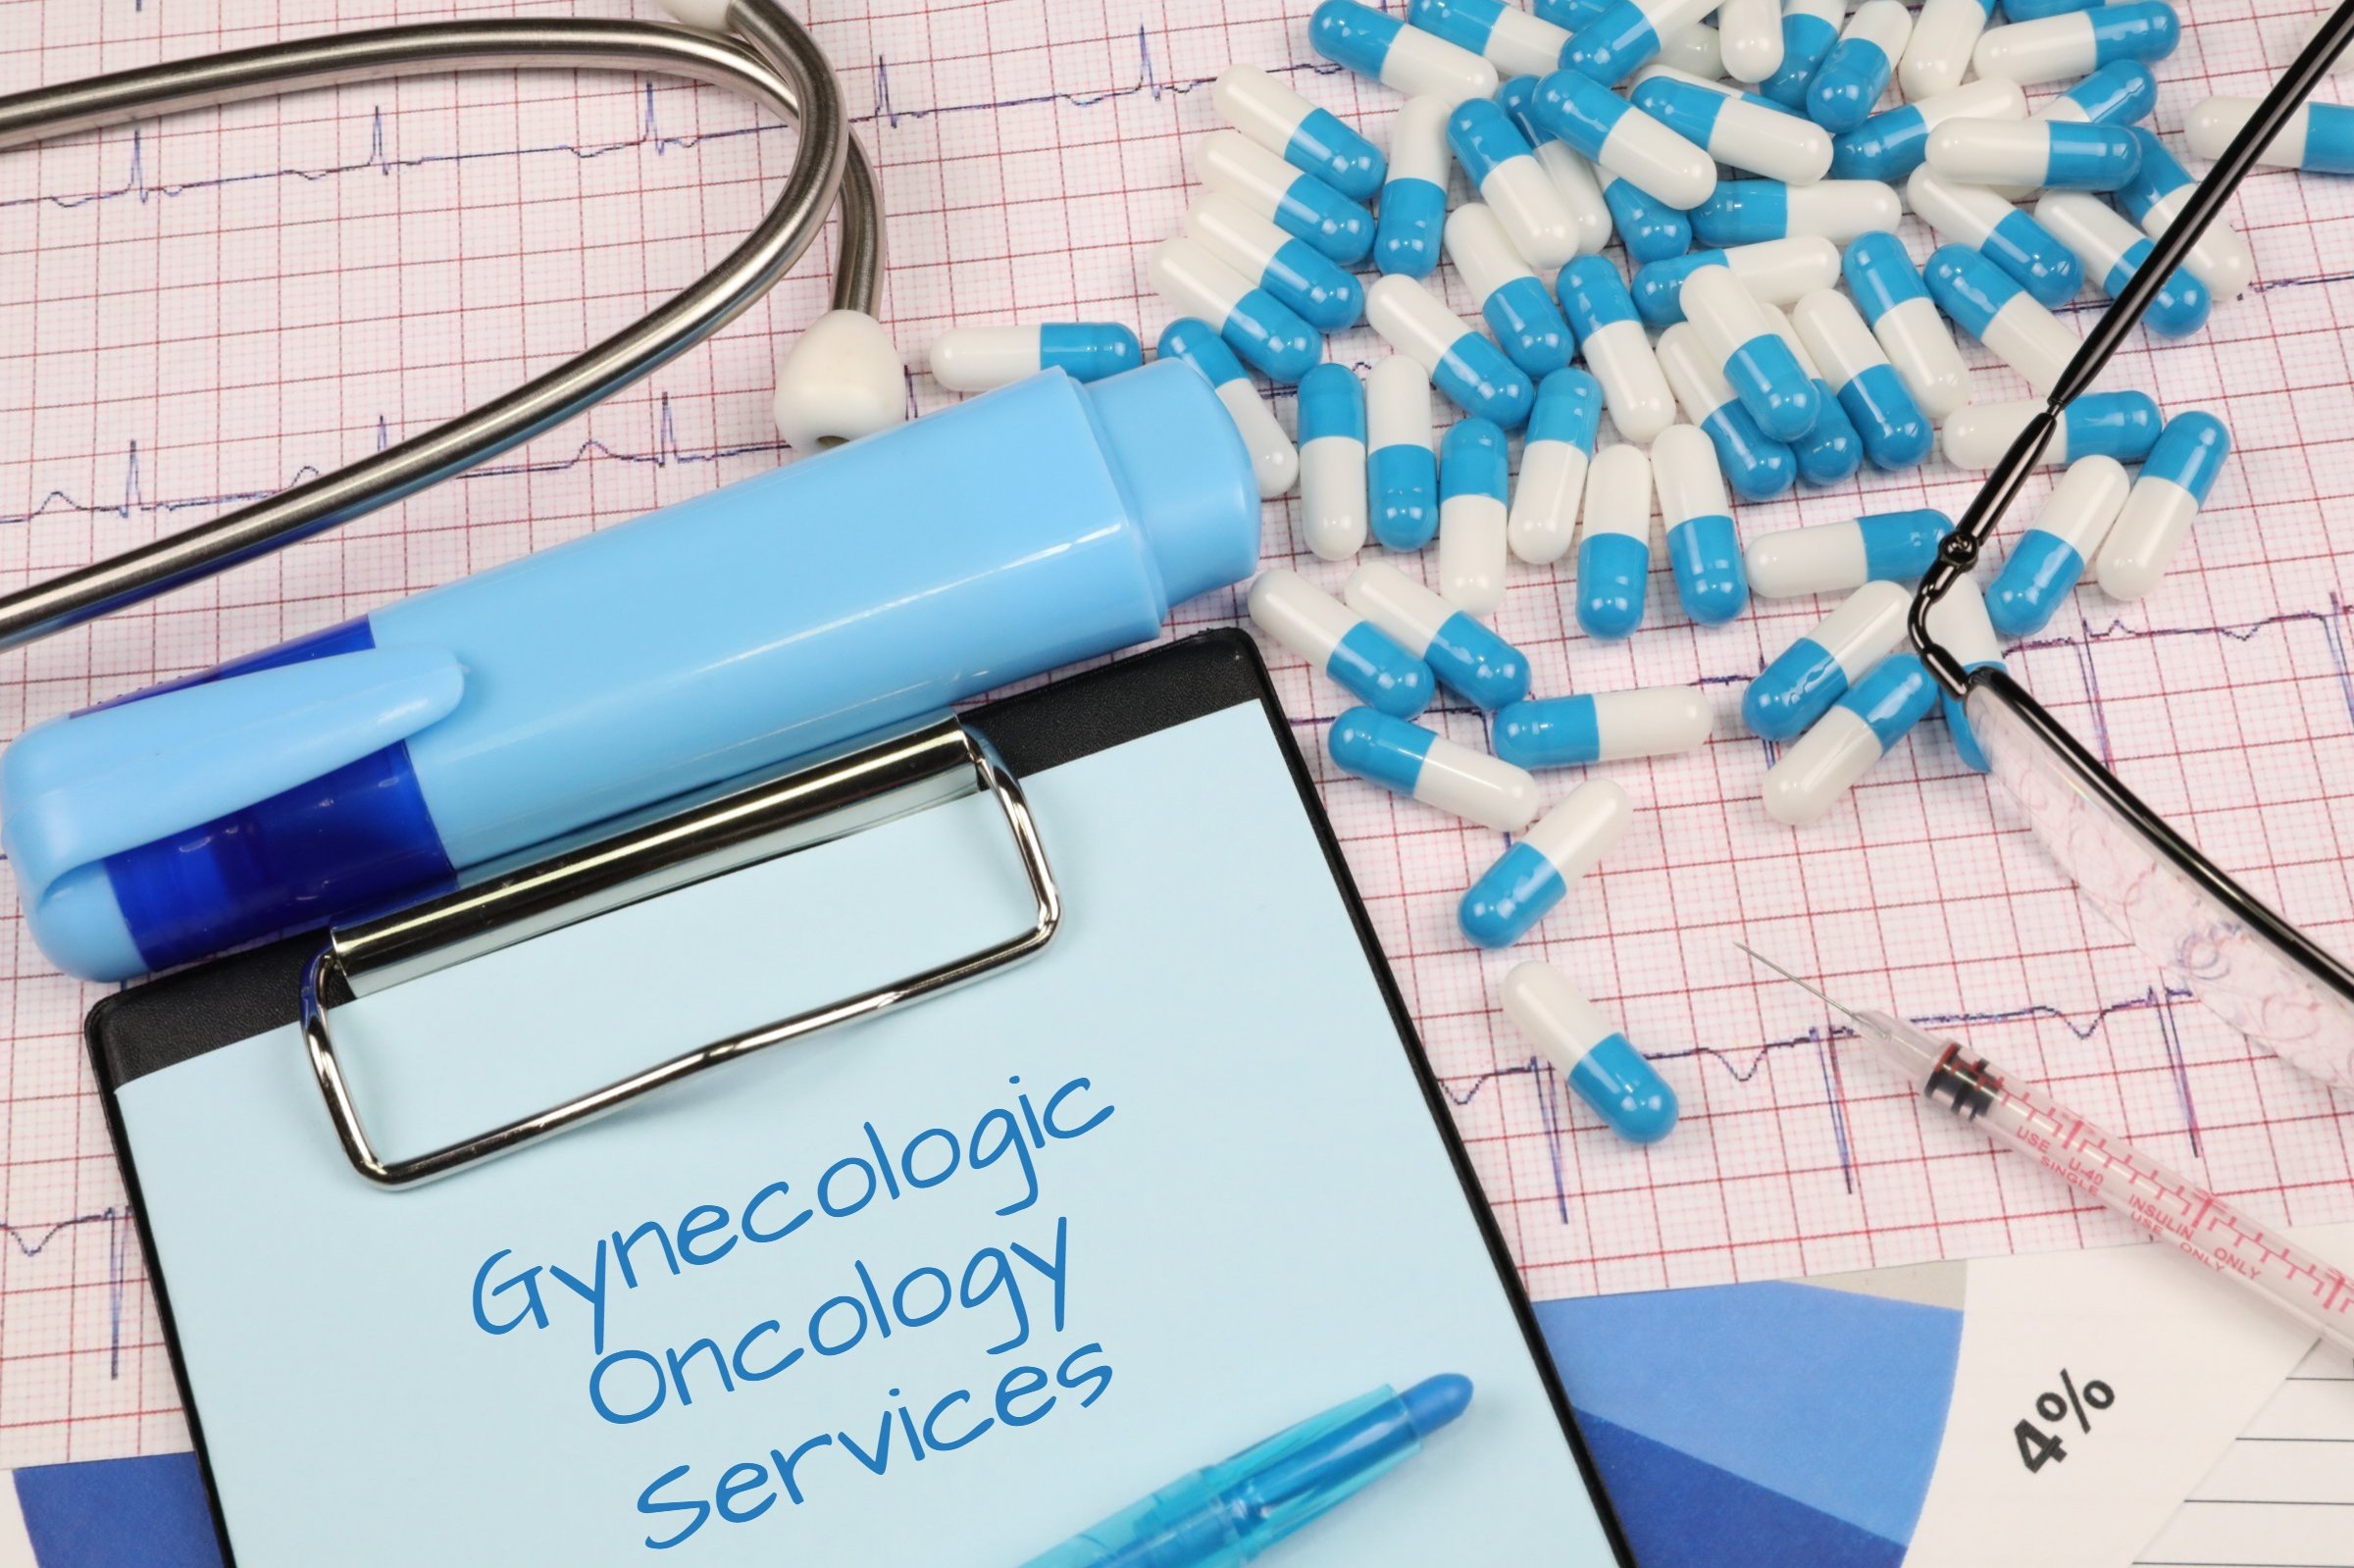 gynecologic oncology services